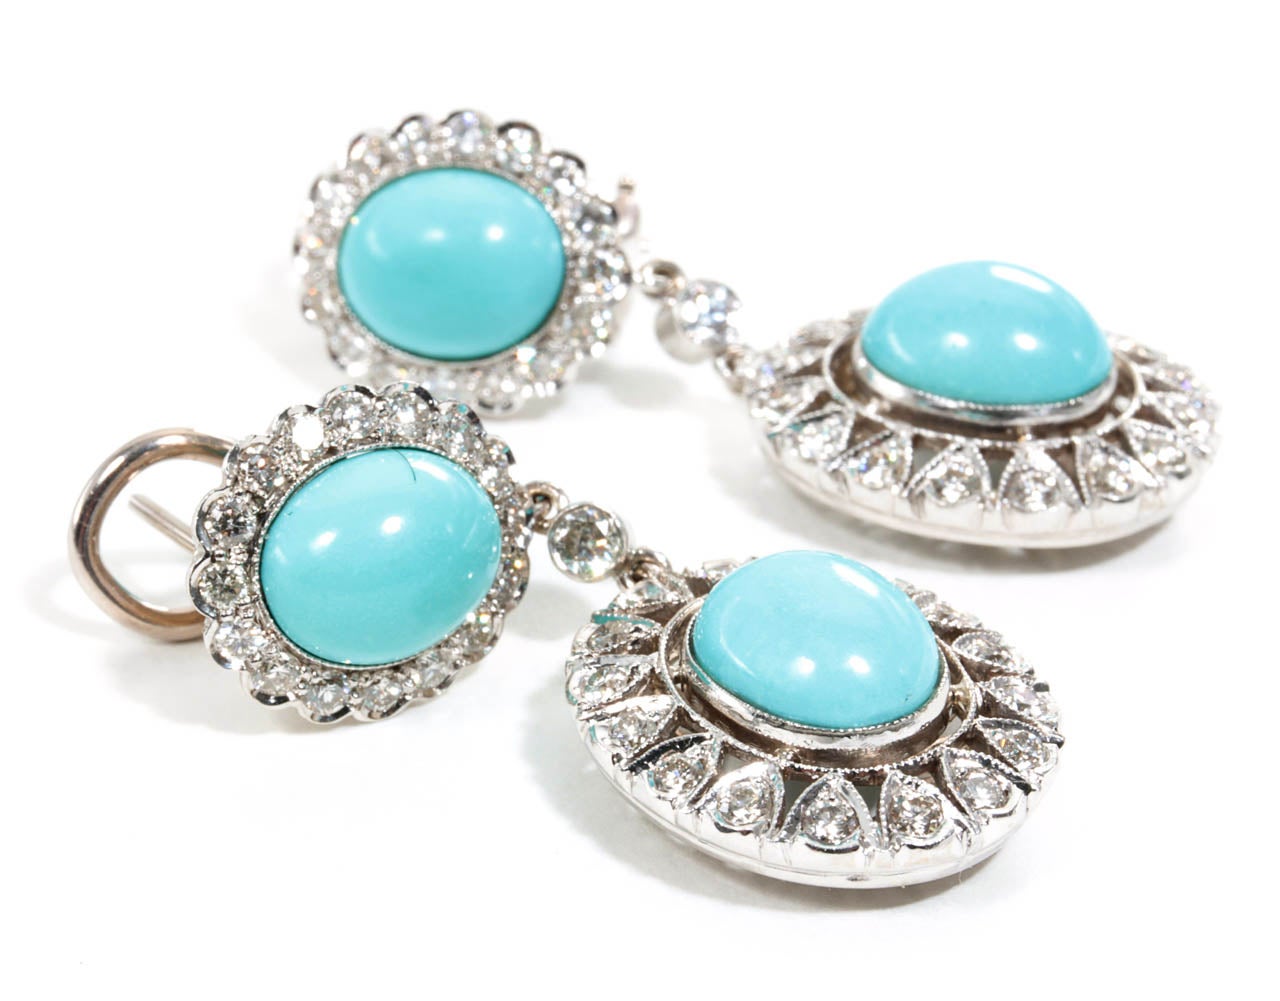 10 carats of beautiful blue turquoise, 2.05 carats of F color VS clarity diamonds. 

This earring is entirely handmade and engraved with fine detail.

Set in 18k white gold.

A beautiful earring to add to any collection.